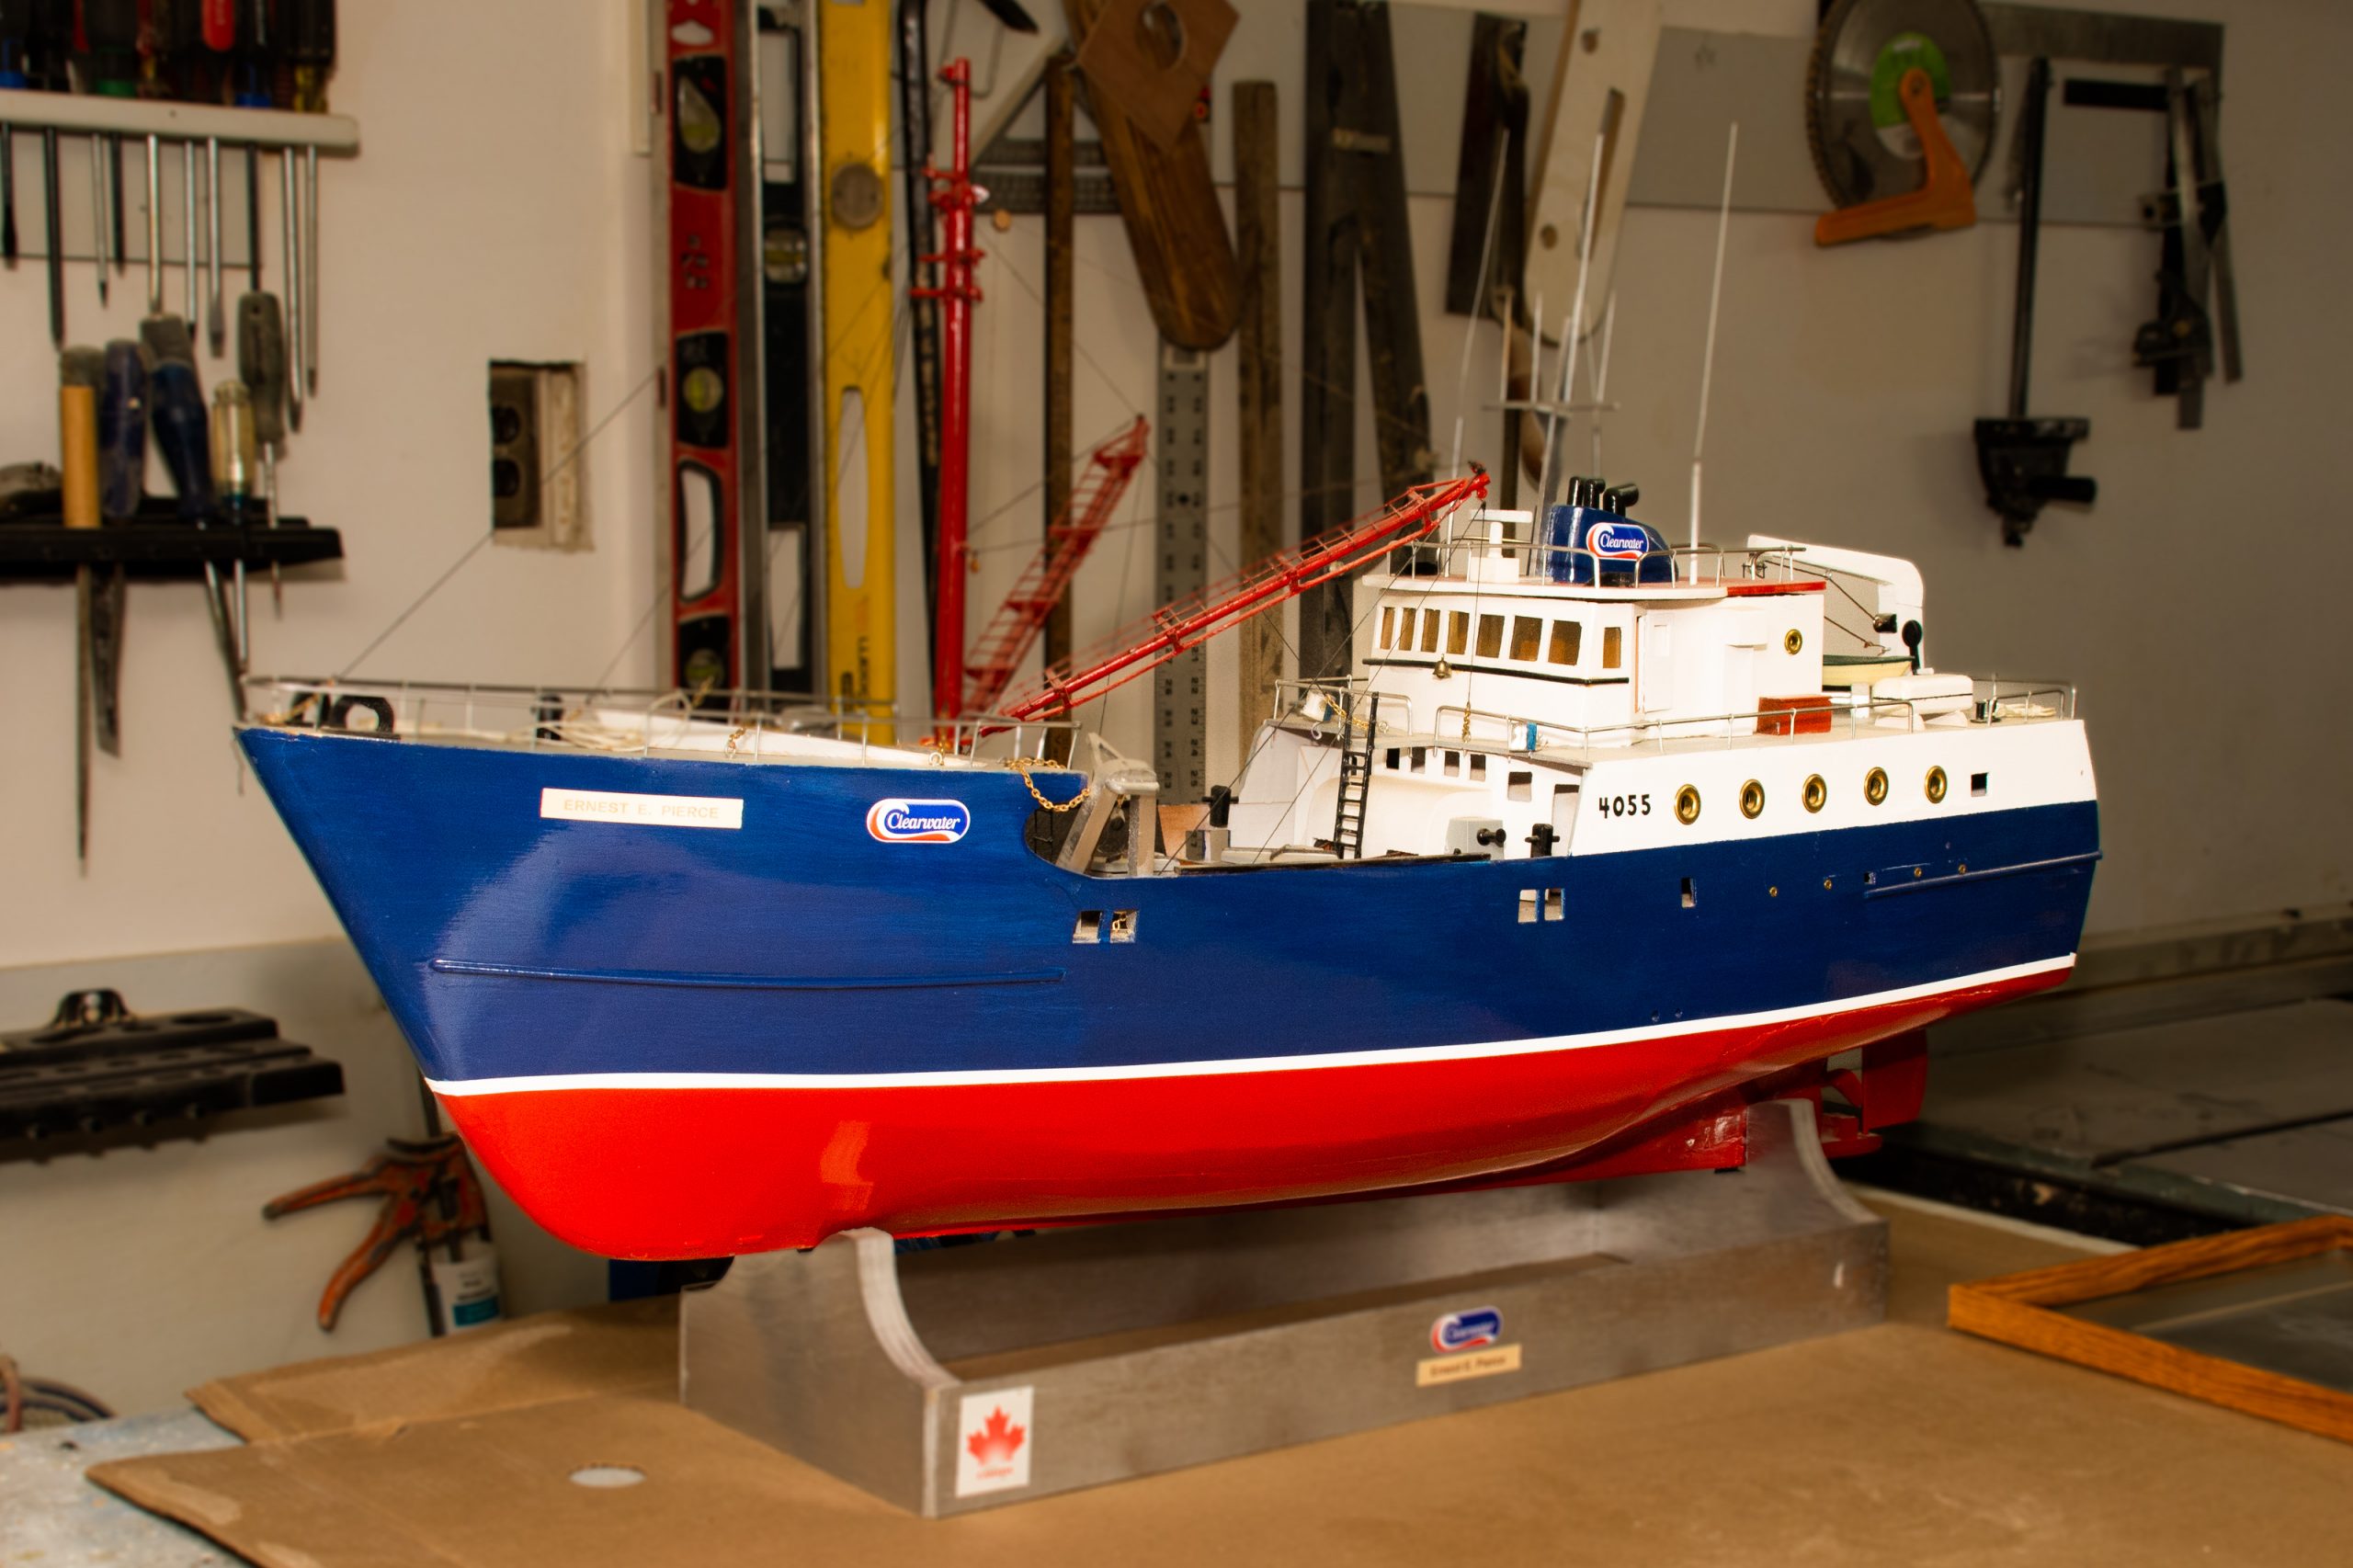 Kevin was given this boat in a sad condition — half smashed — but he restored it to its present state.